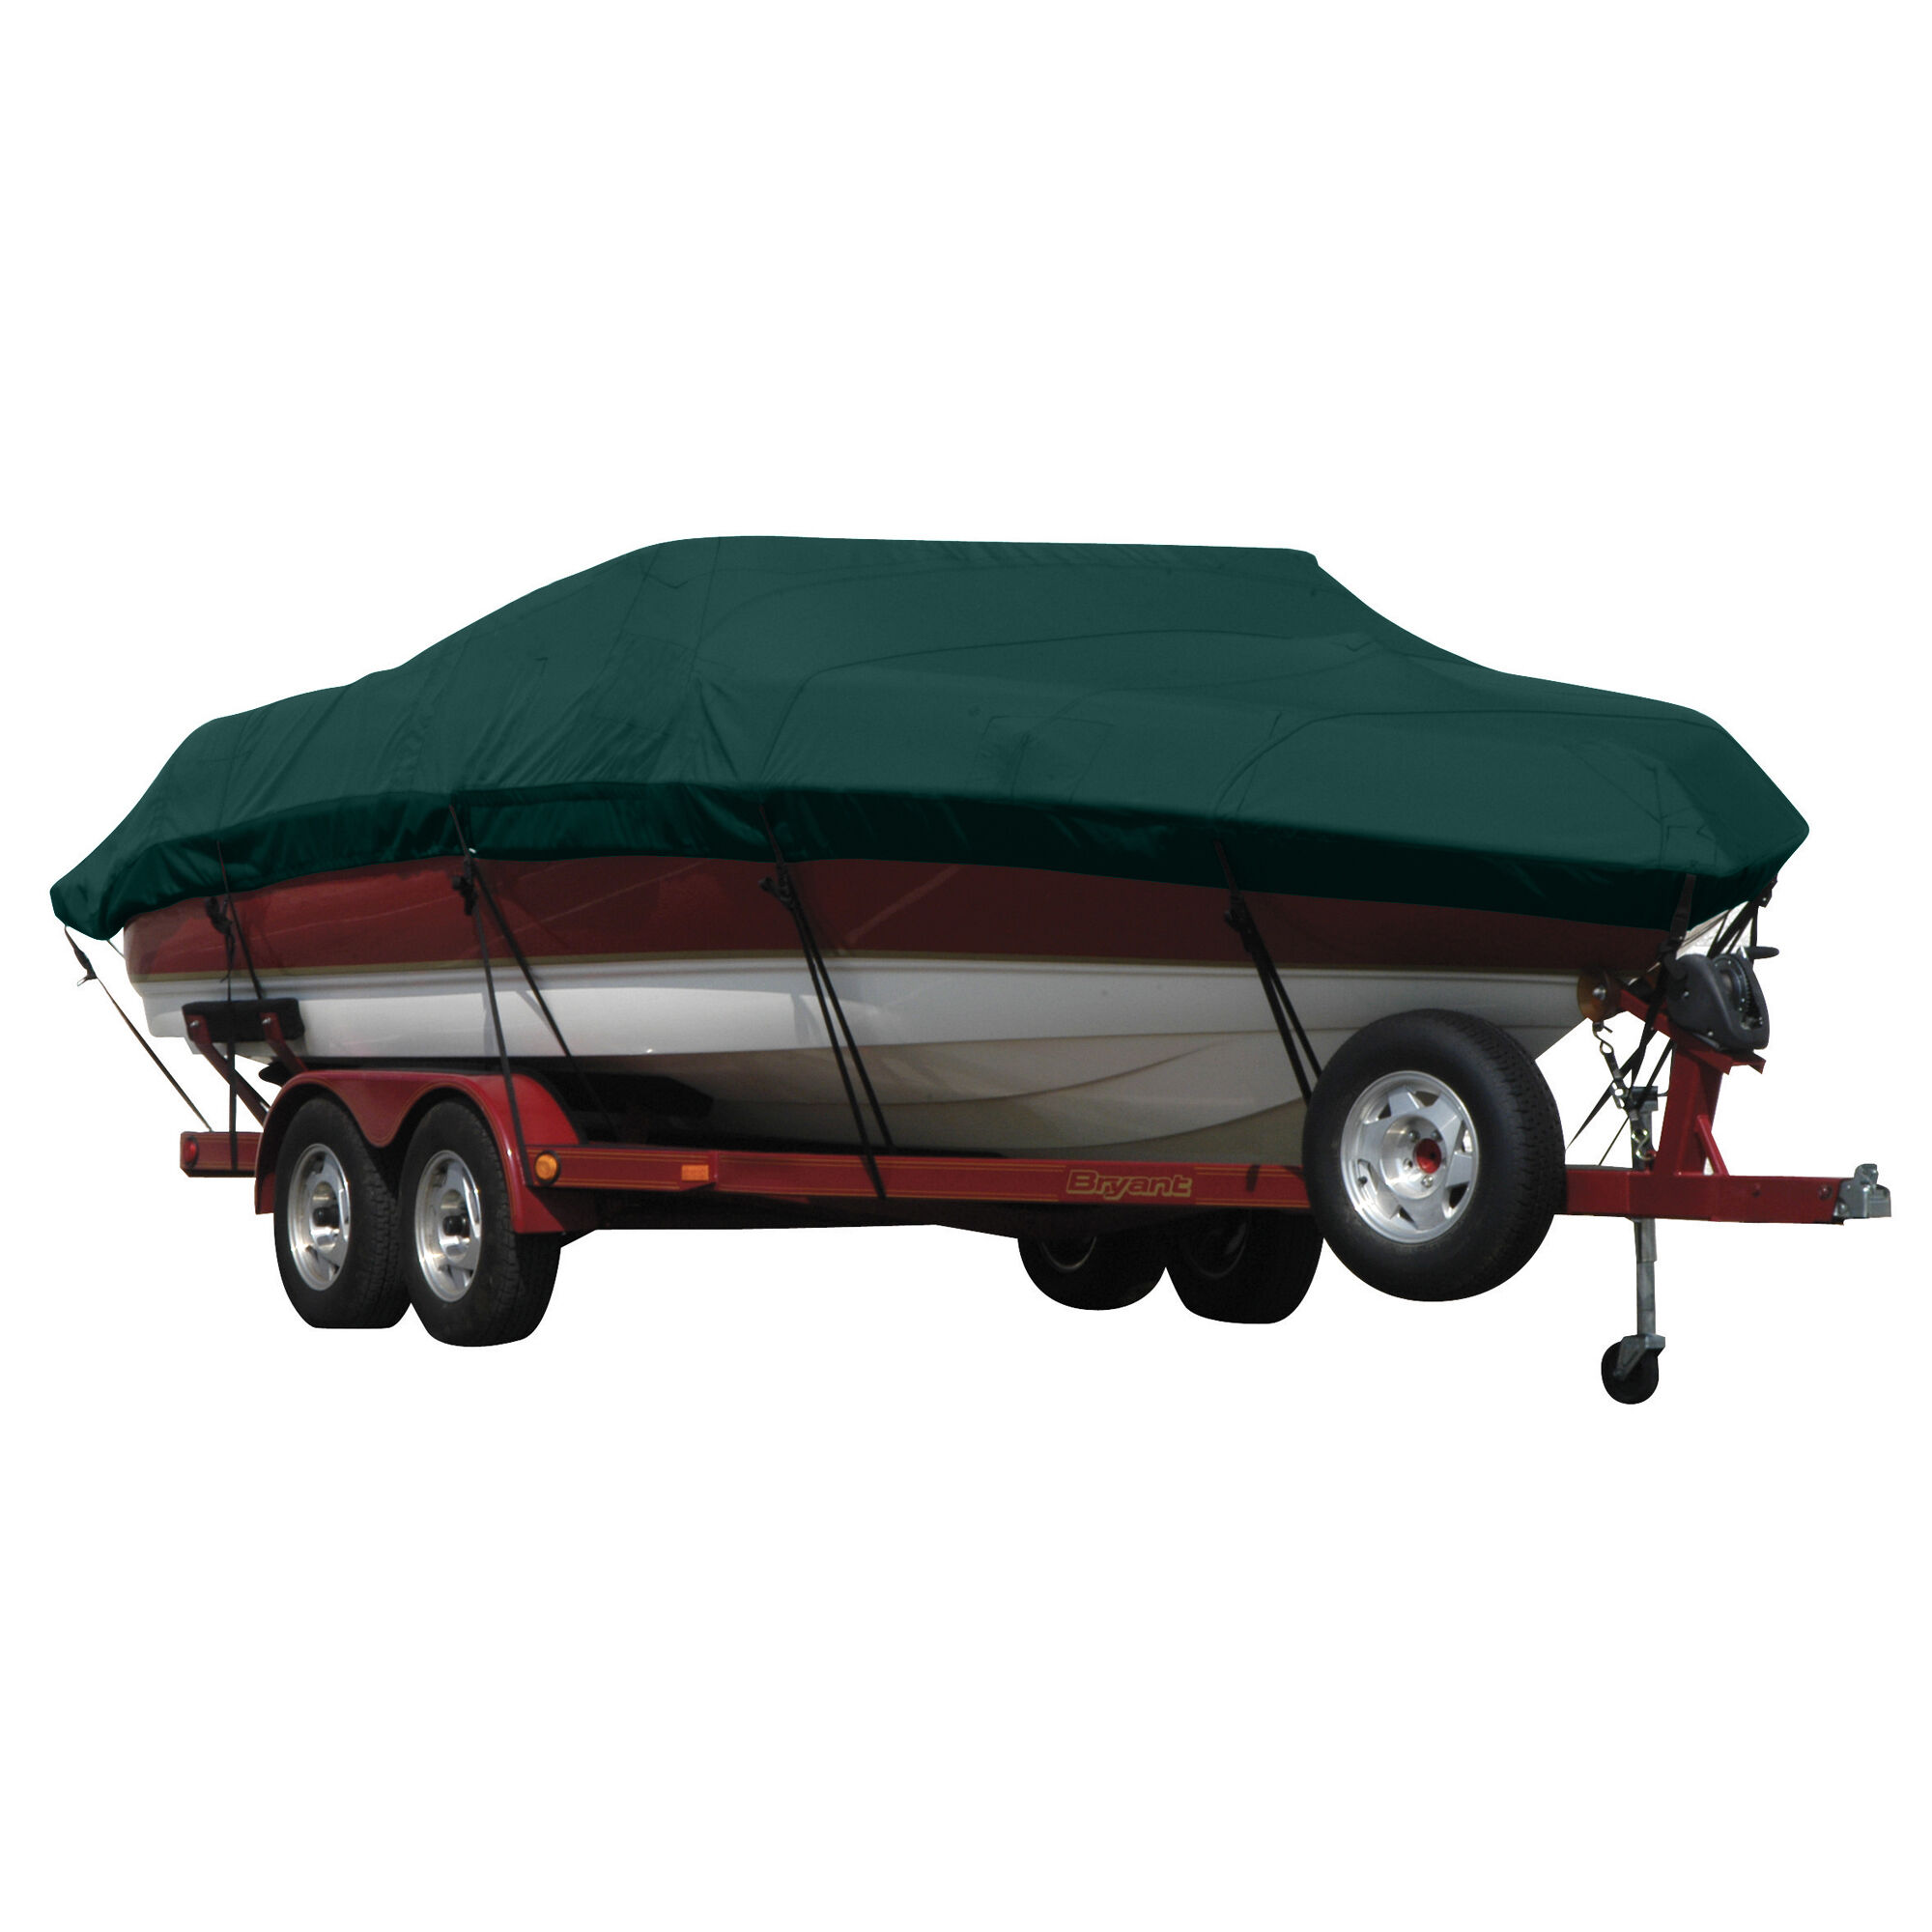 Covermate Exact Fit Sunbrella Boat Cover for Sea Ray 250 Cc 250 Cc No Pulpit I/O. Forest Green